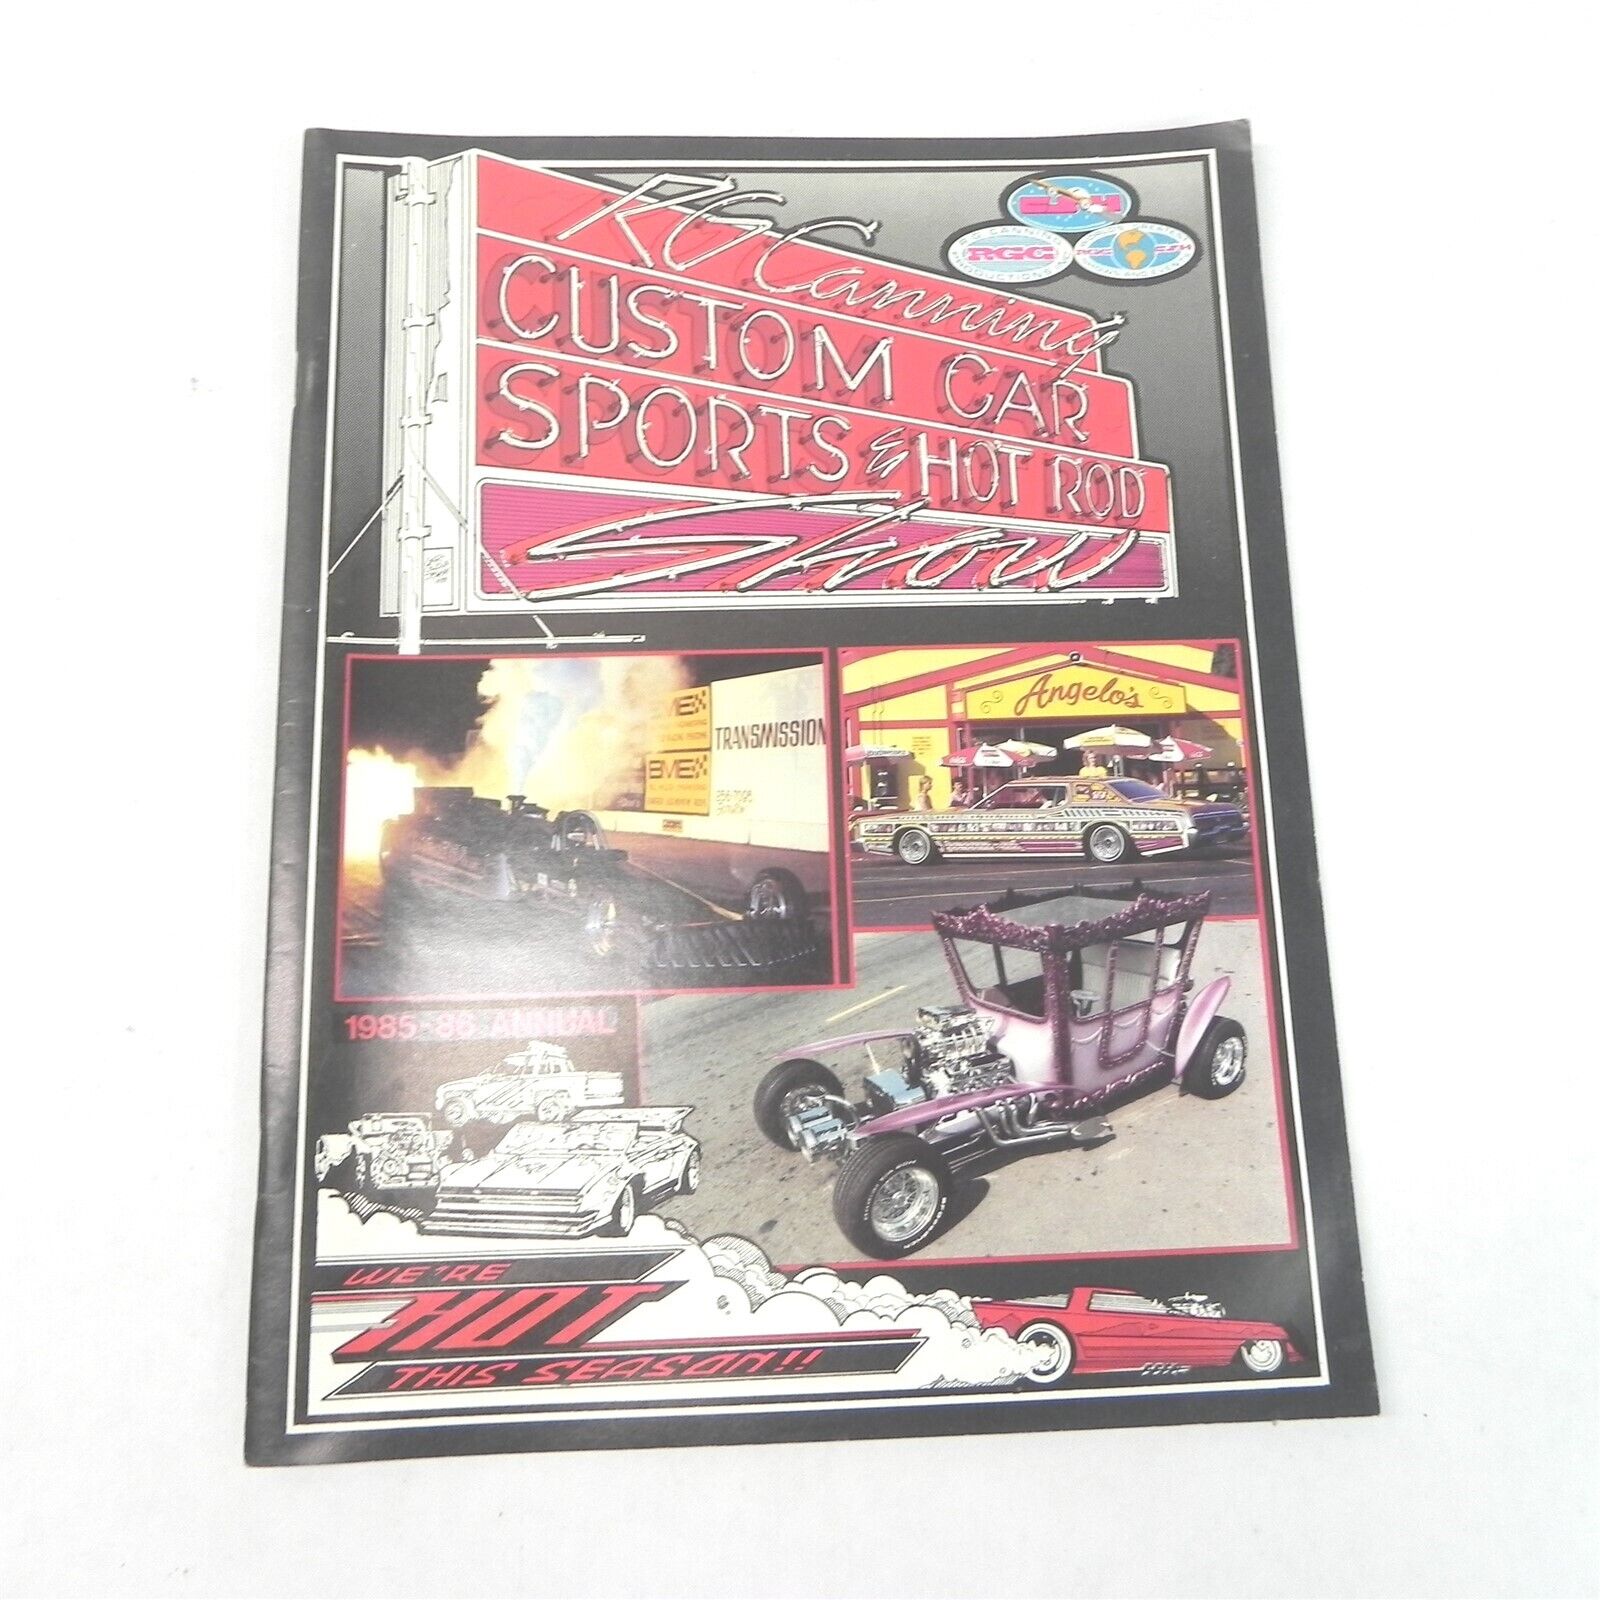 VINTAGE 1985-1986 RC CANNING CUSTOM SPORTS AND HOT ROD CAR SHOW OFFICIAL PROGRAM